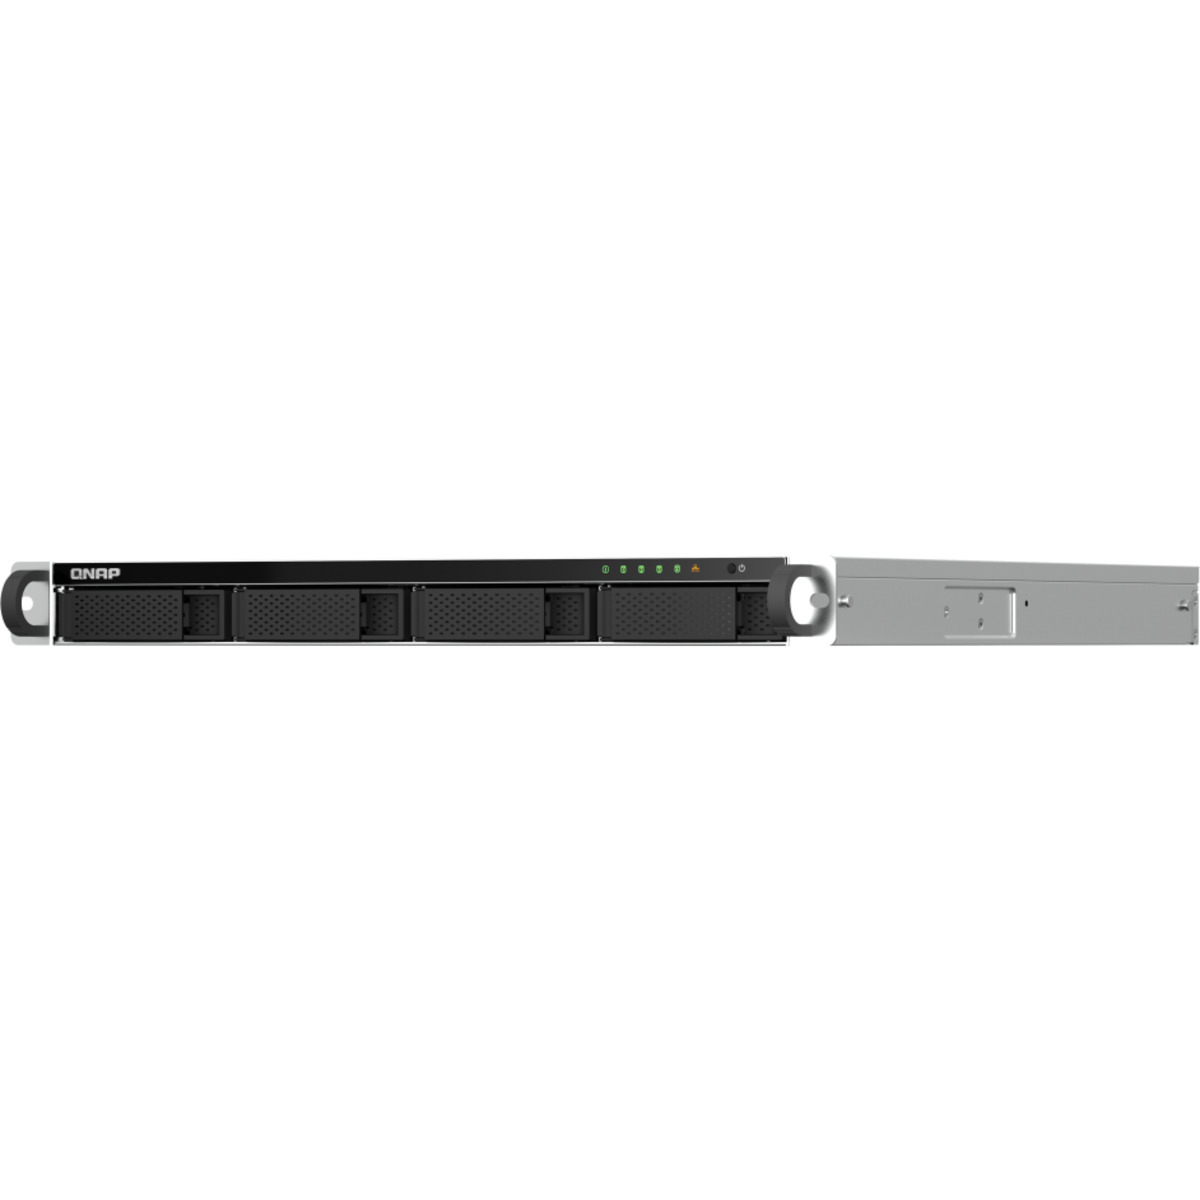 QNAP TS-464U 30tb 4-Bay RackMount Multimedia / Power User / Business NAS - Network Attached Storage Device 3x10tb Seagate IronWolf Pro ST10000NT001 3.5 7200rpm SATA 6Gb/s HDD NAS Class Drives Installed - Burn-In Tested - ON SALE TS-464U